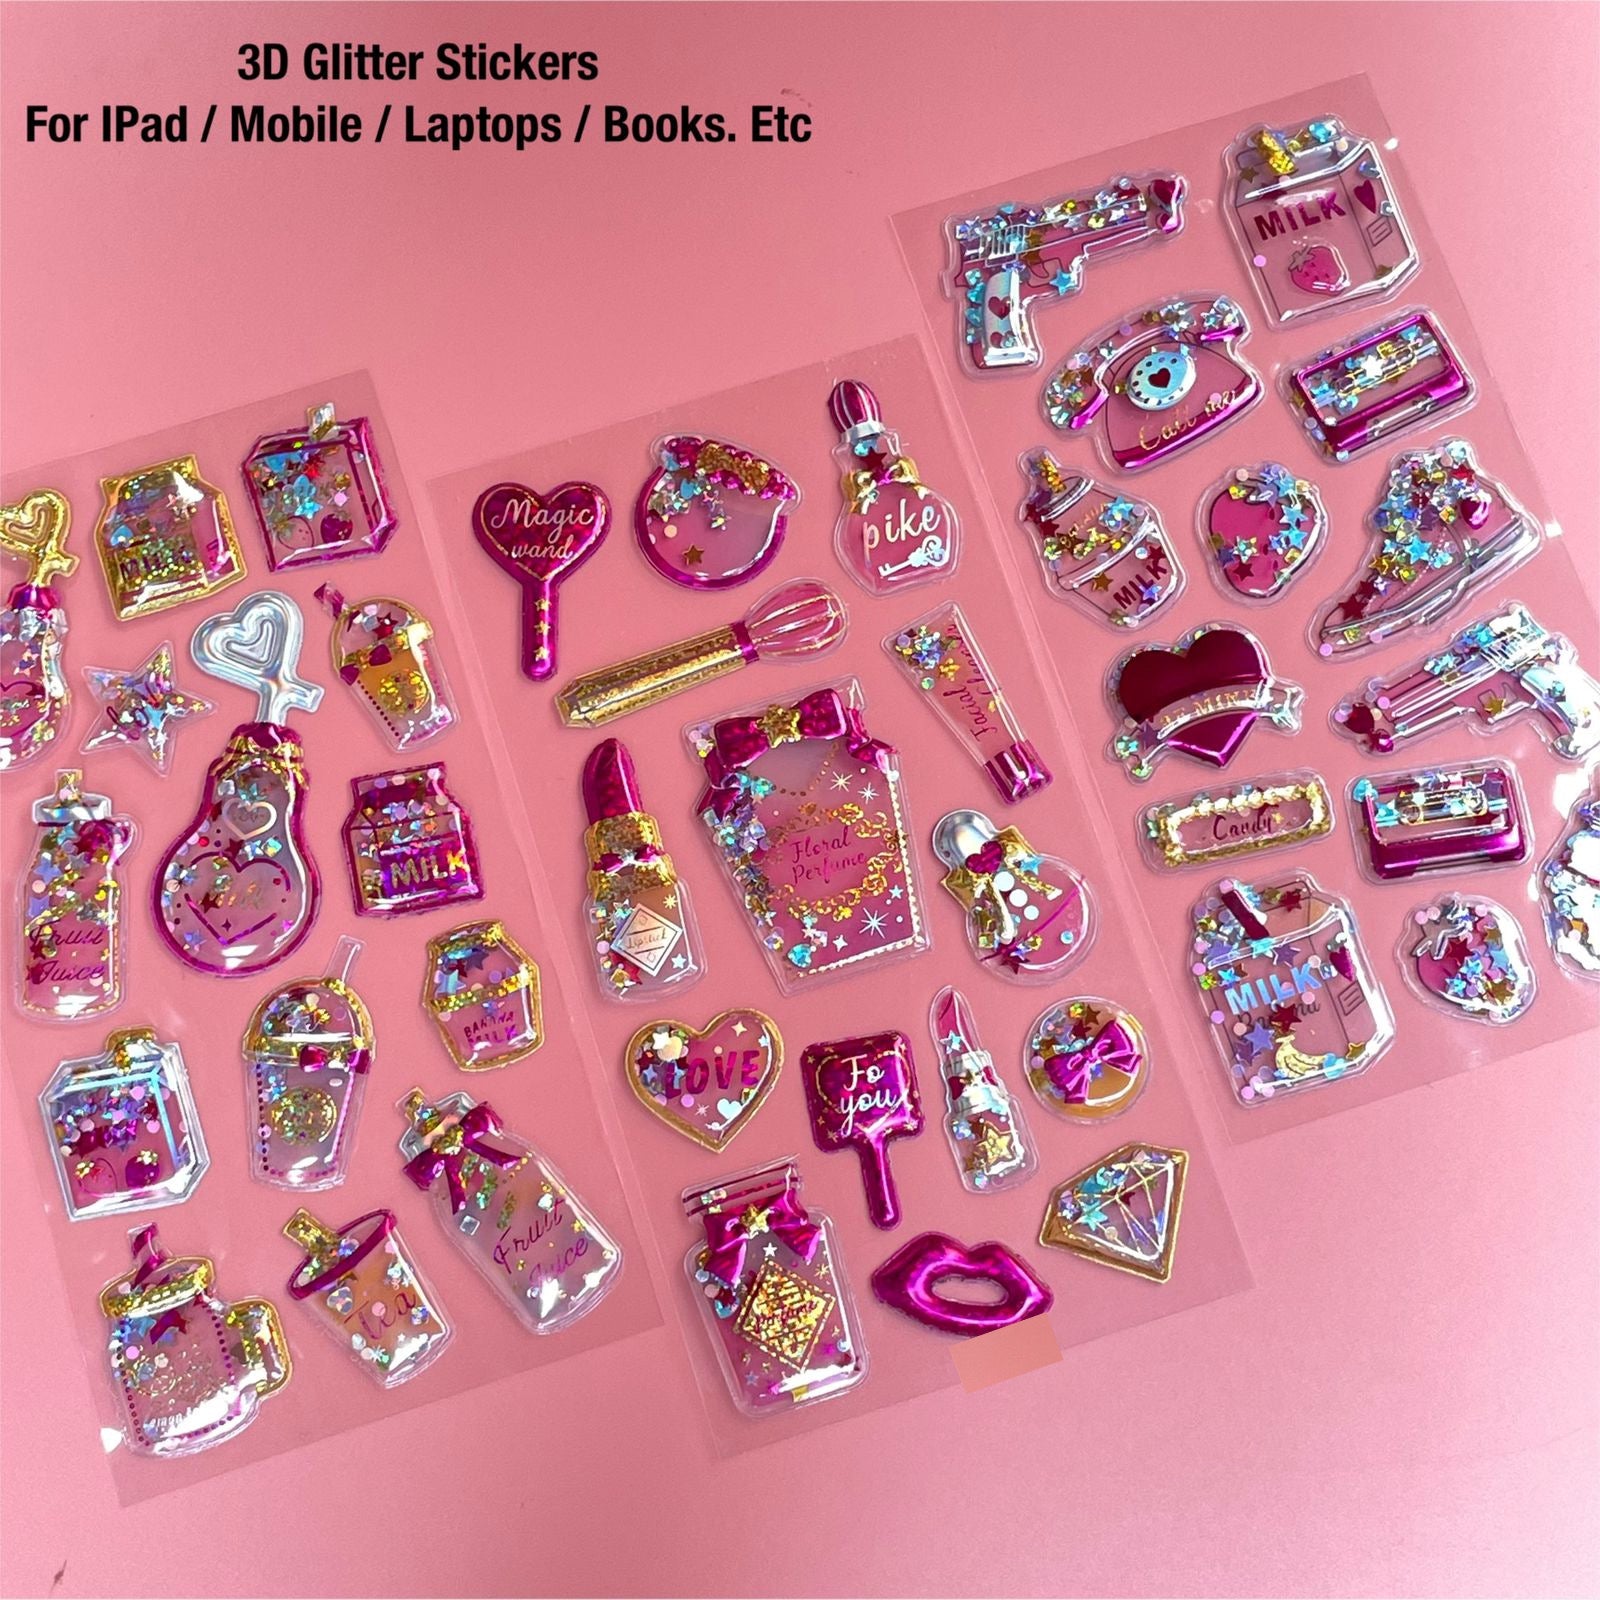 Shining magic 3d stickers( glitter) – The Gifts Quest